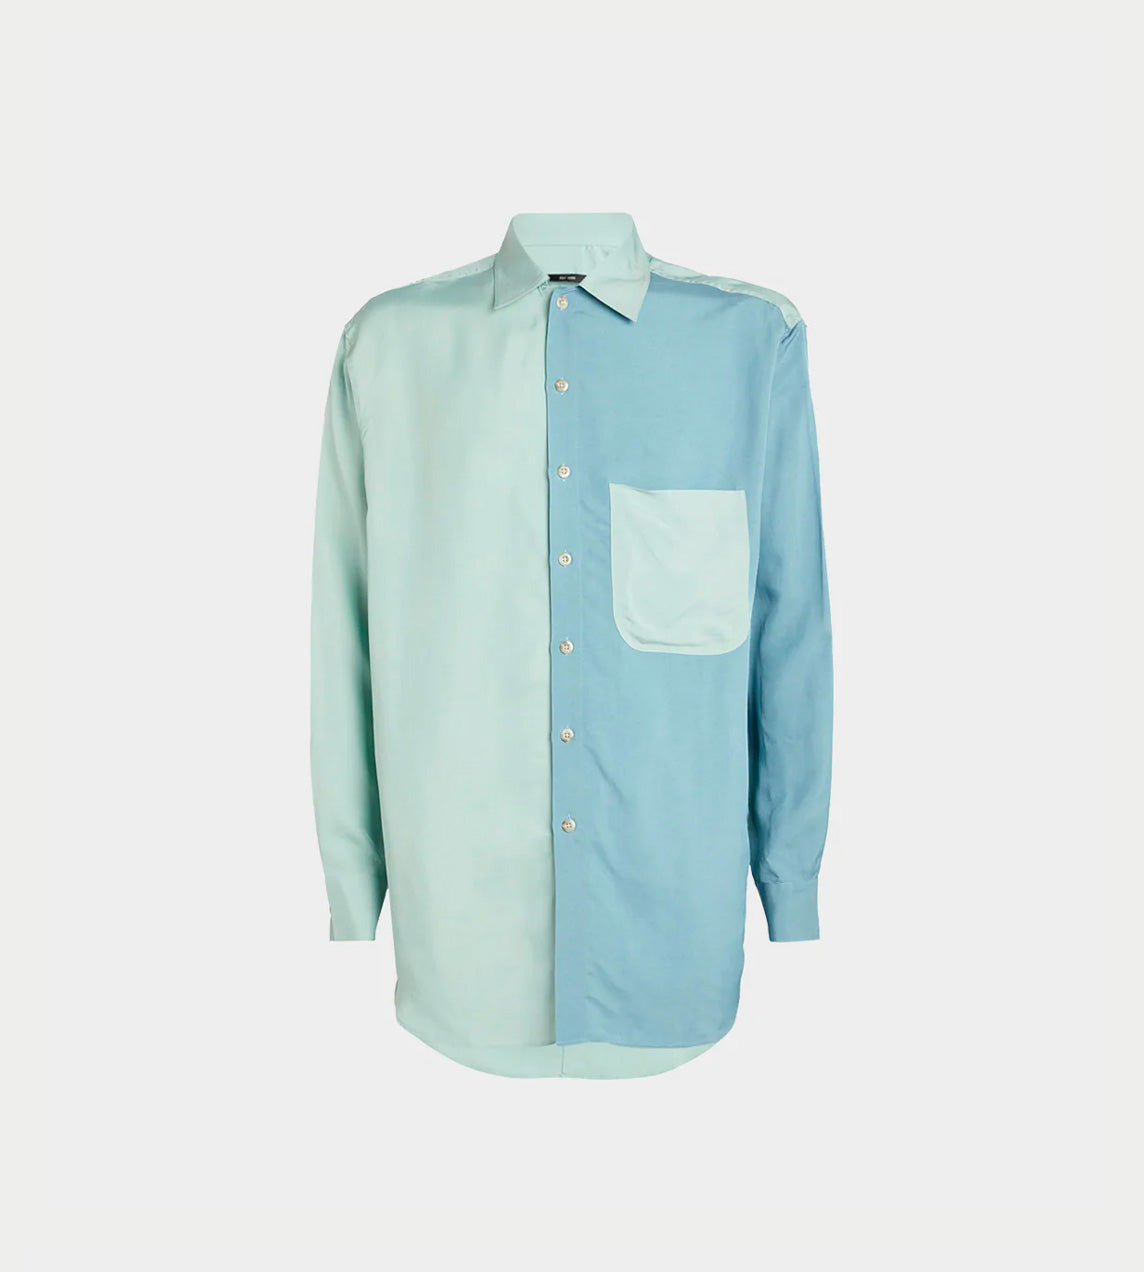 SONG FOR THE MUTE - L/S Colourblocked Shirt Icy Blue